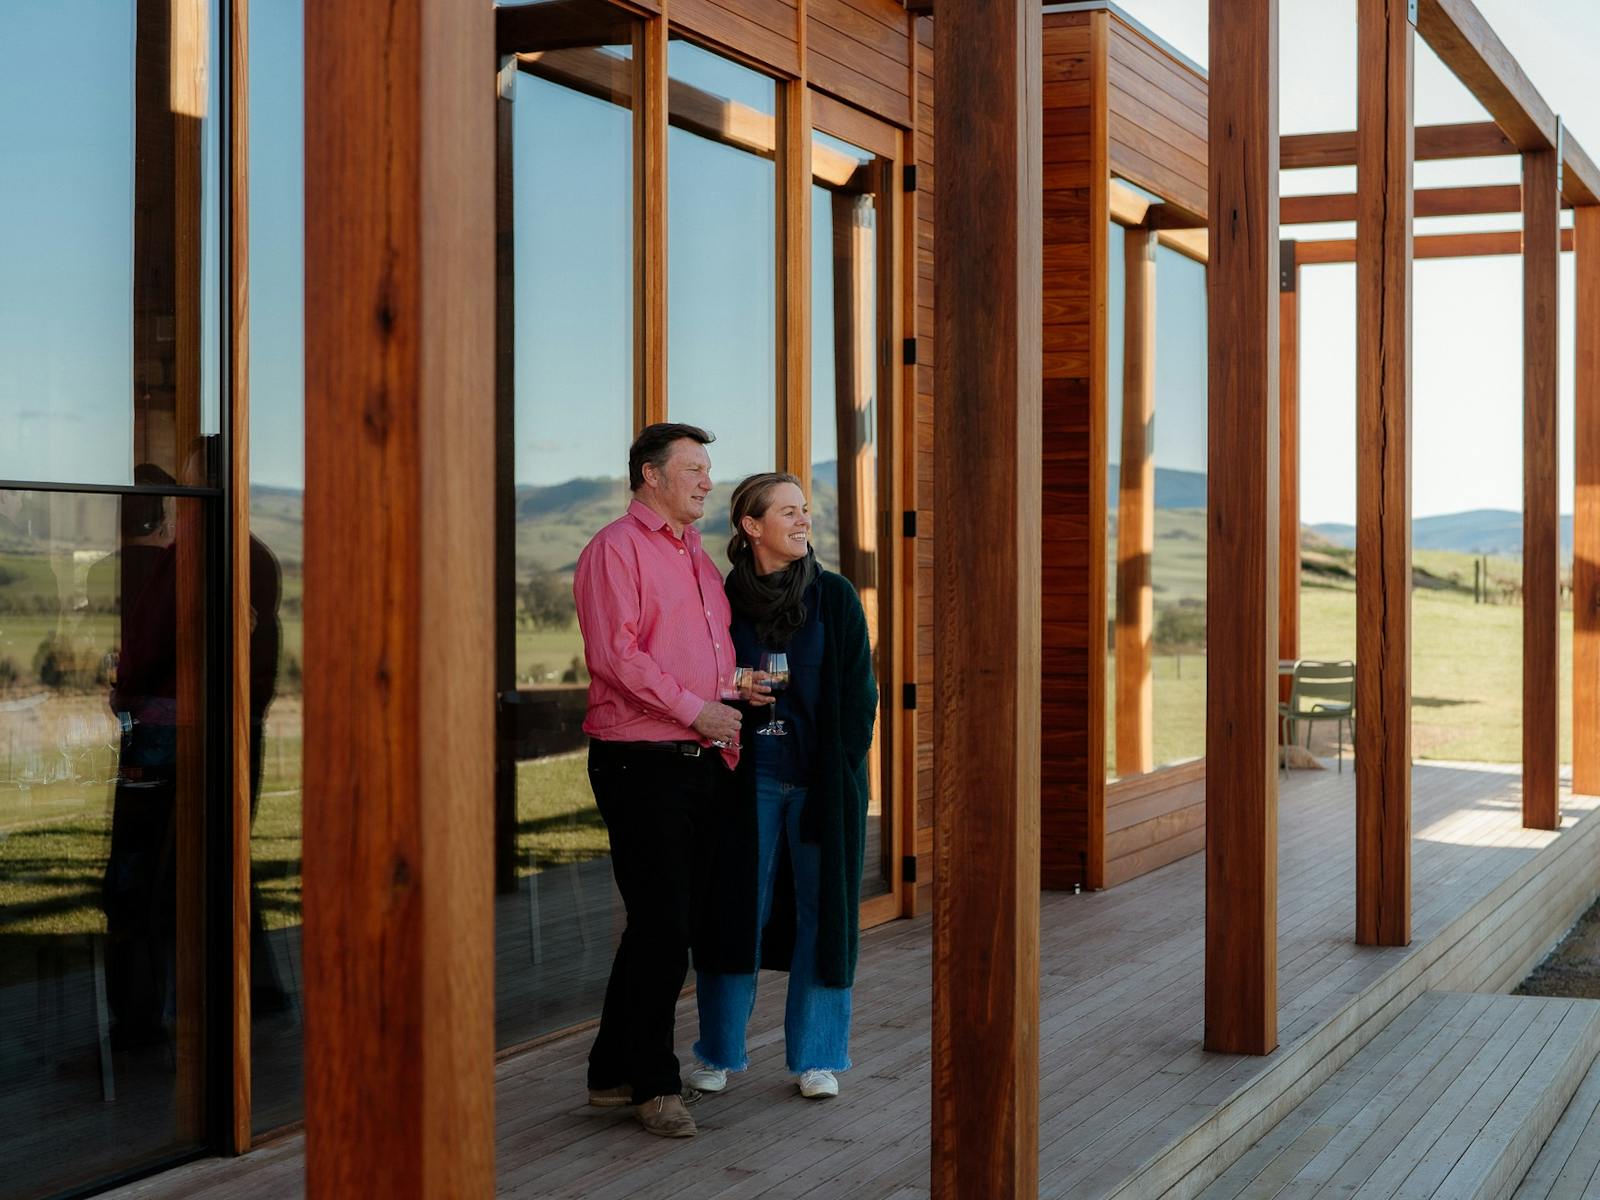 Two people standing on the deck in front of the cellar door holding glasses of wine.